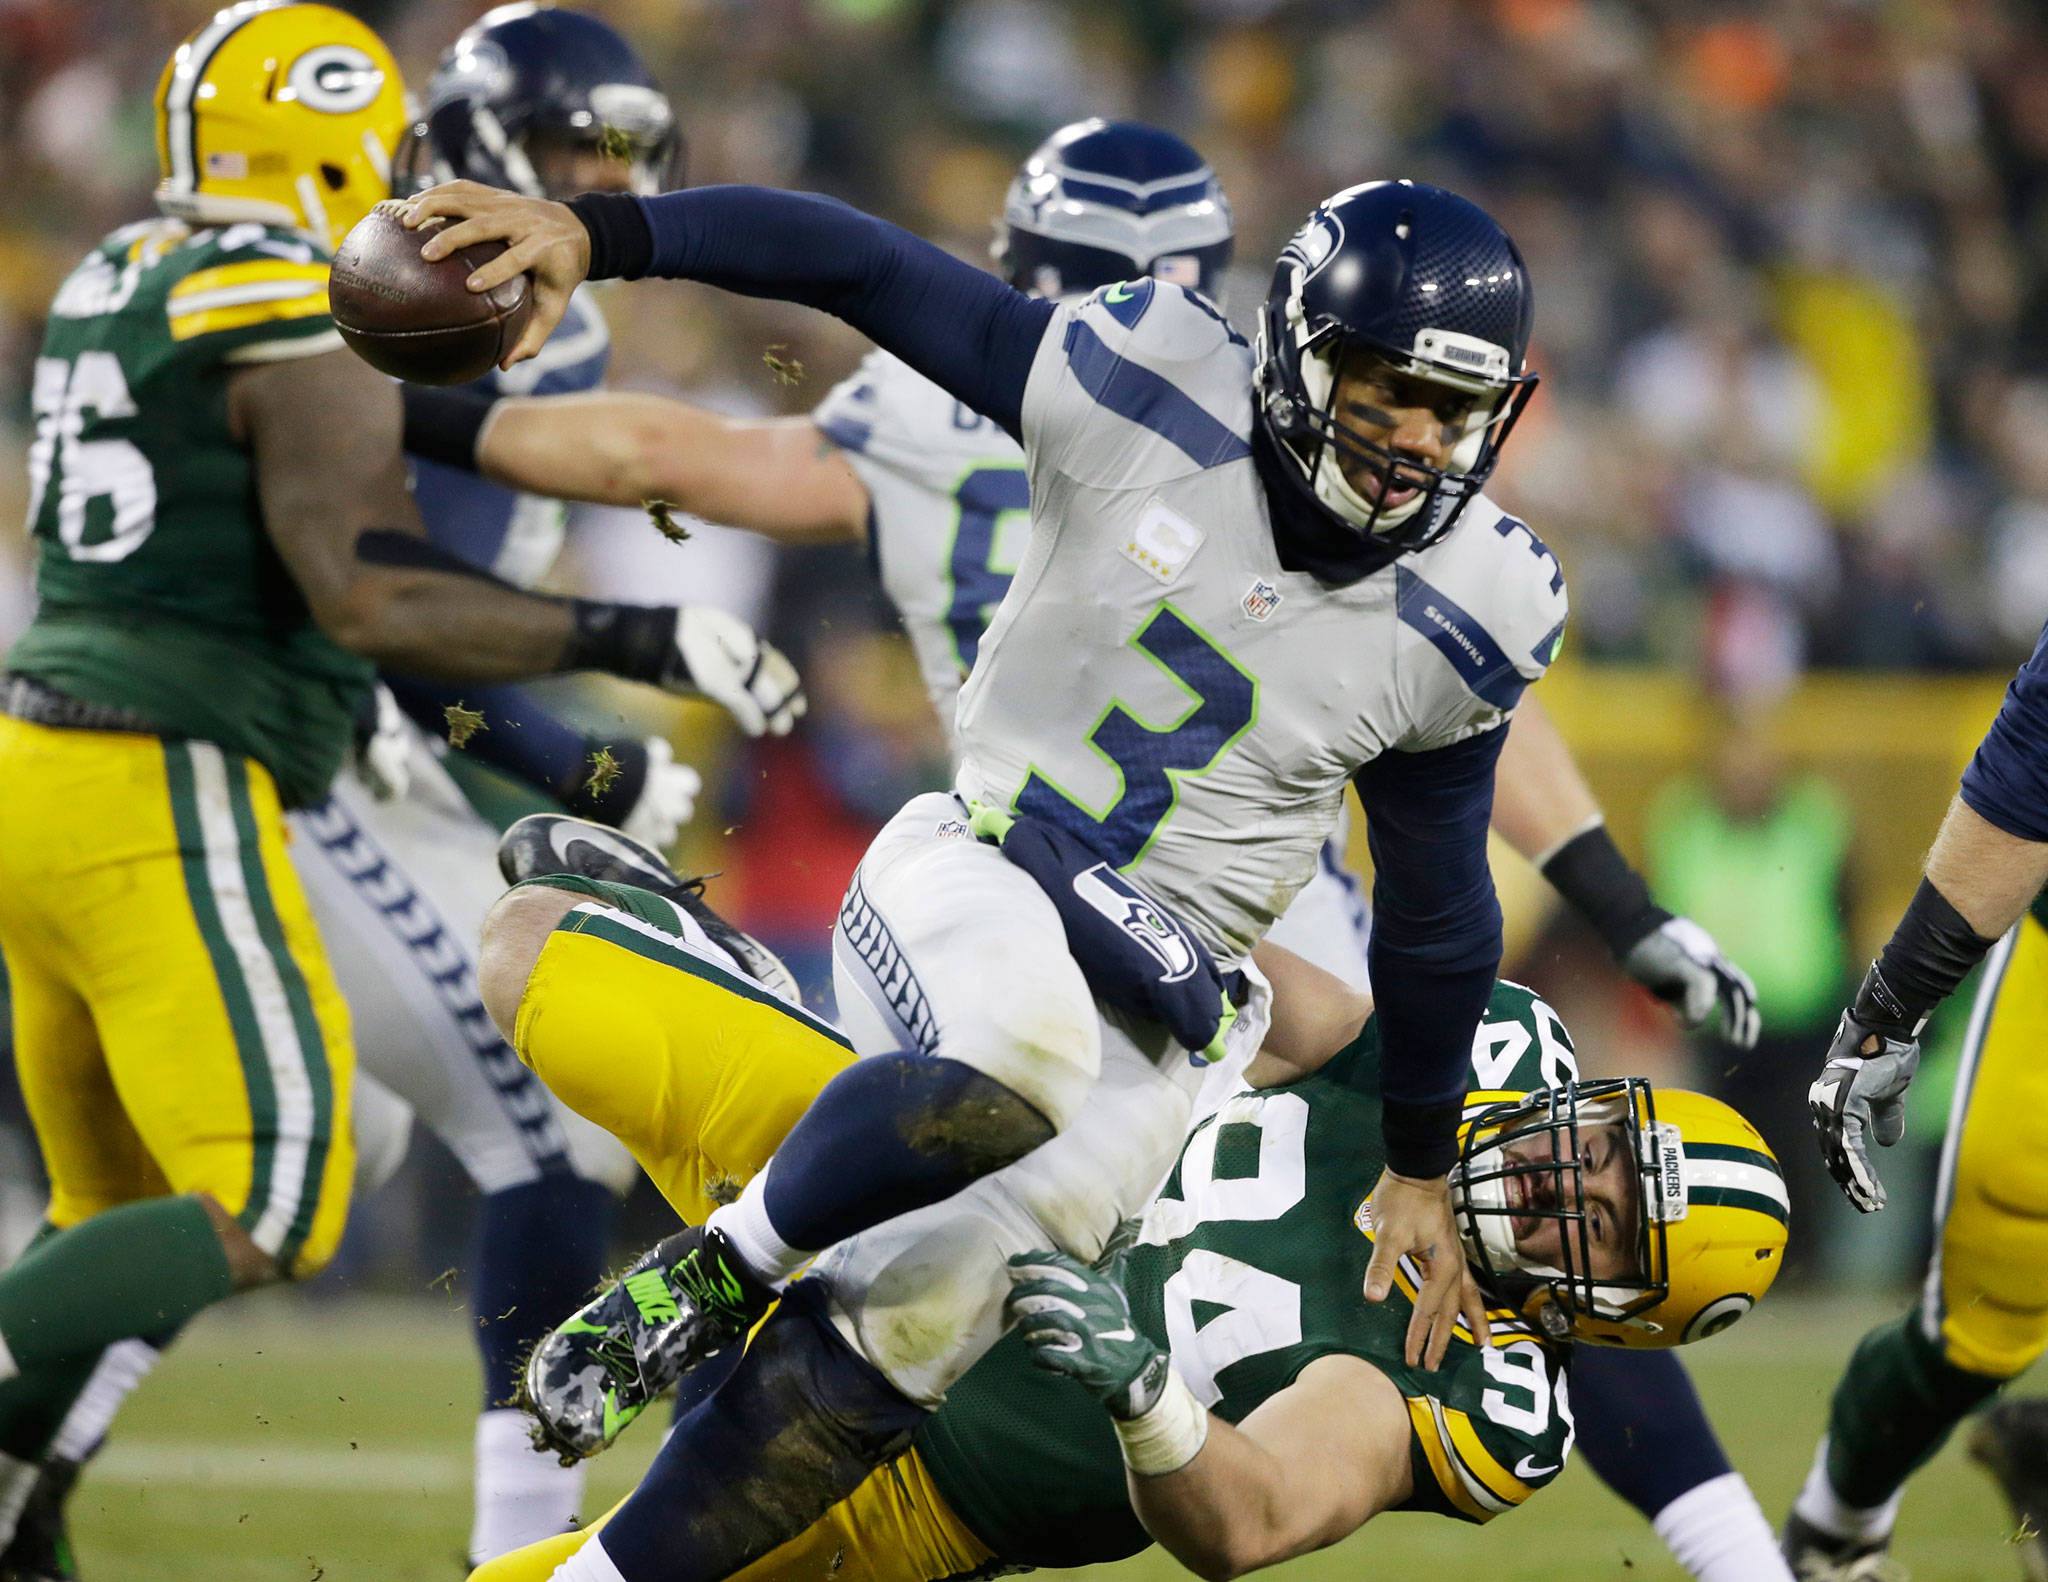 Seahawks quarterback Russell Wilson threw five interceptions in a 38-10 loss to the Packers in 2016 at Lambeau Field. (AP Photo/Jeffrey Phelps)